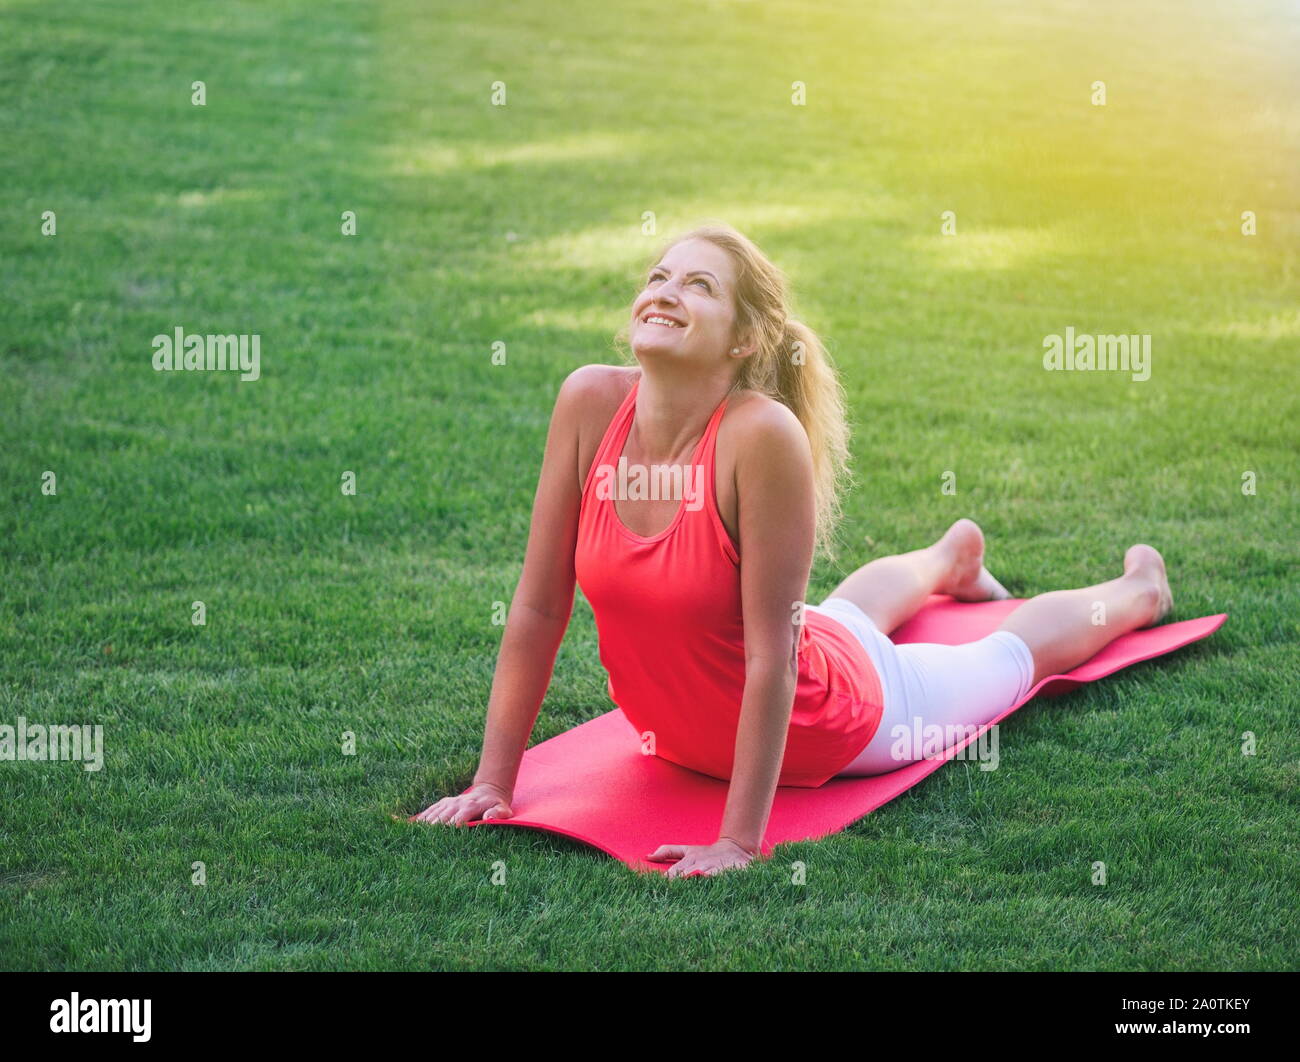 Athletic Woman Doing The Fullbody Cardio Workout Stock Photo